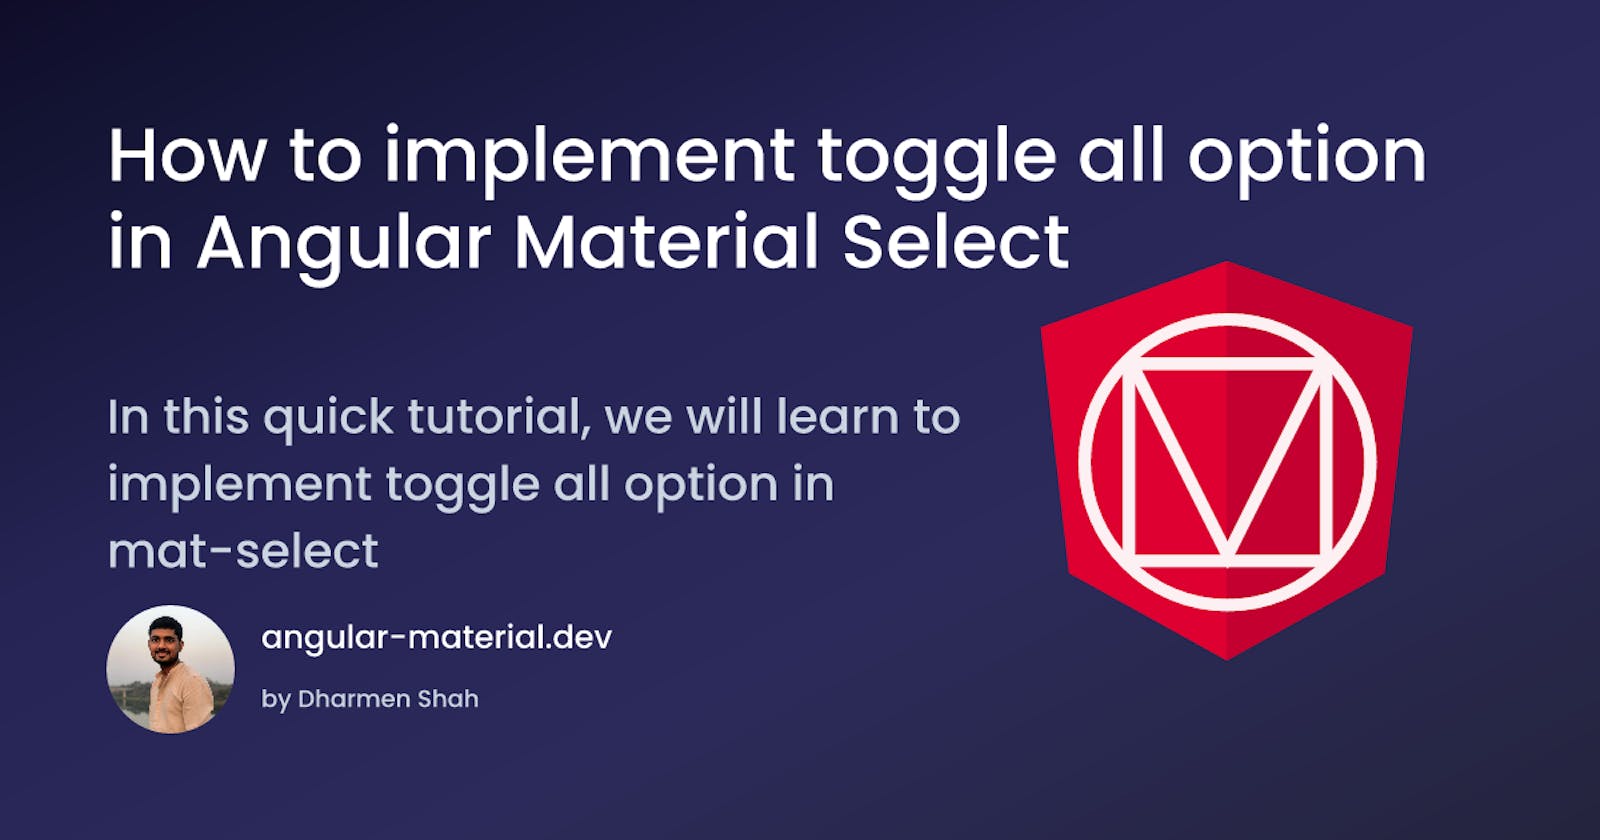 How to implement toggle all option in Angular Material Select